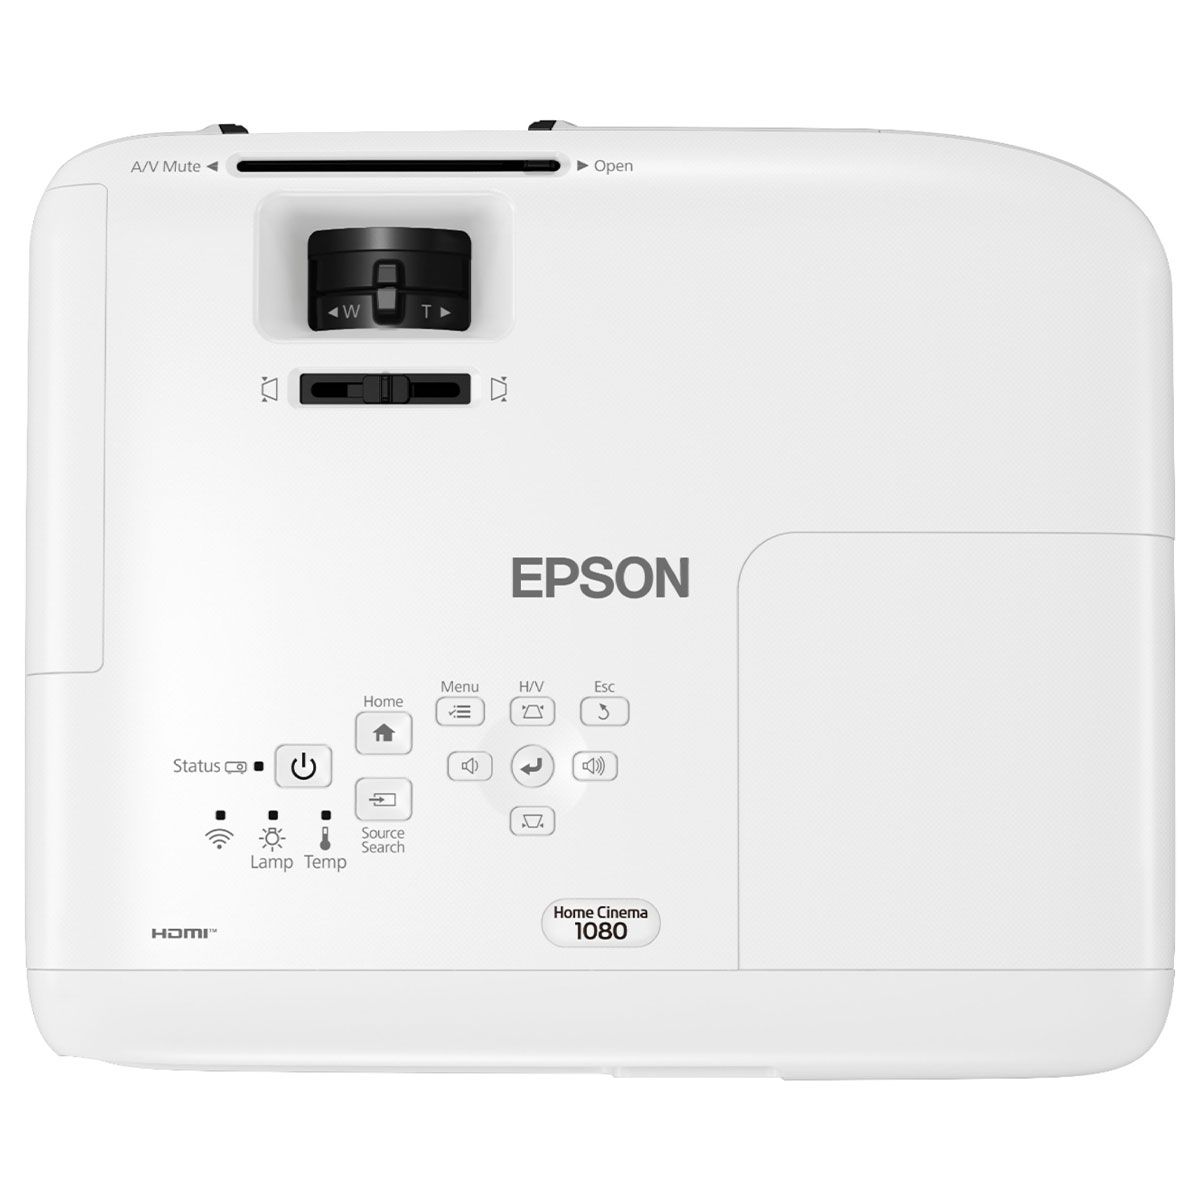 Epson 1080 Projector top view